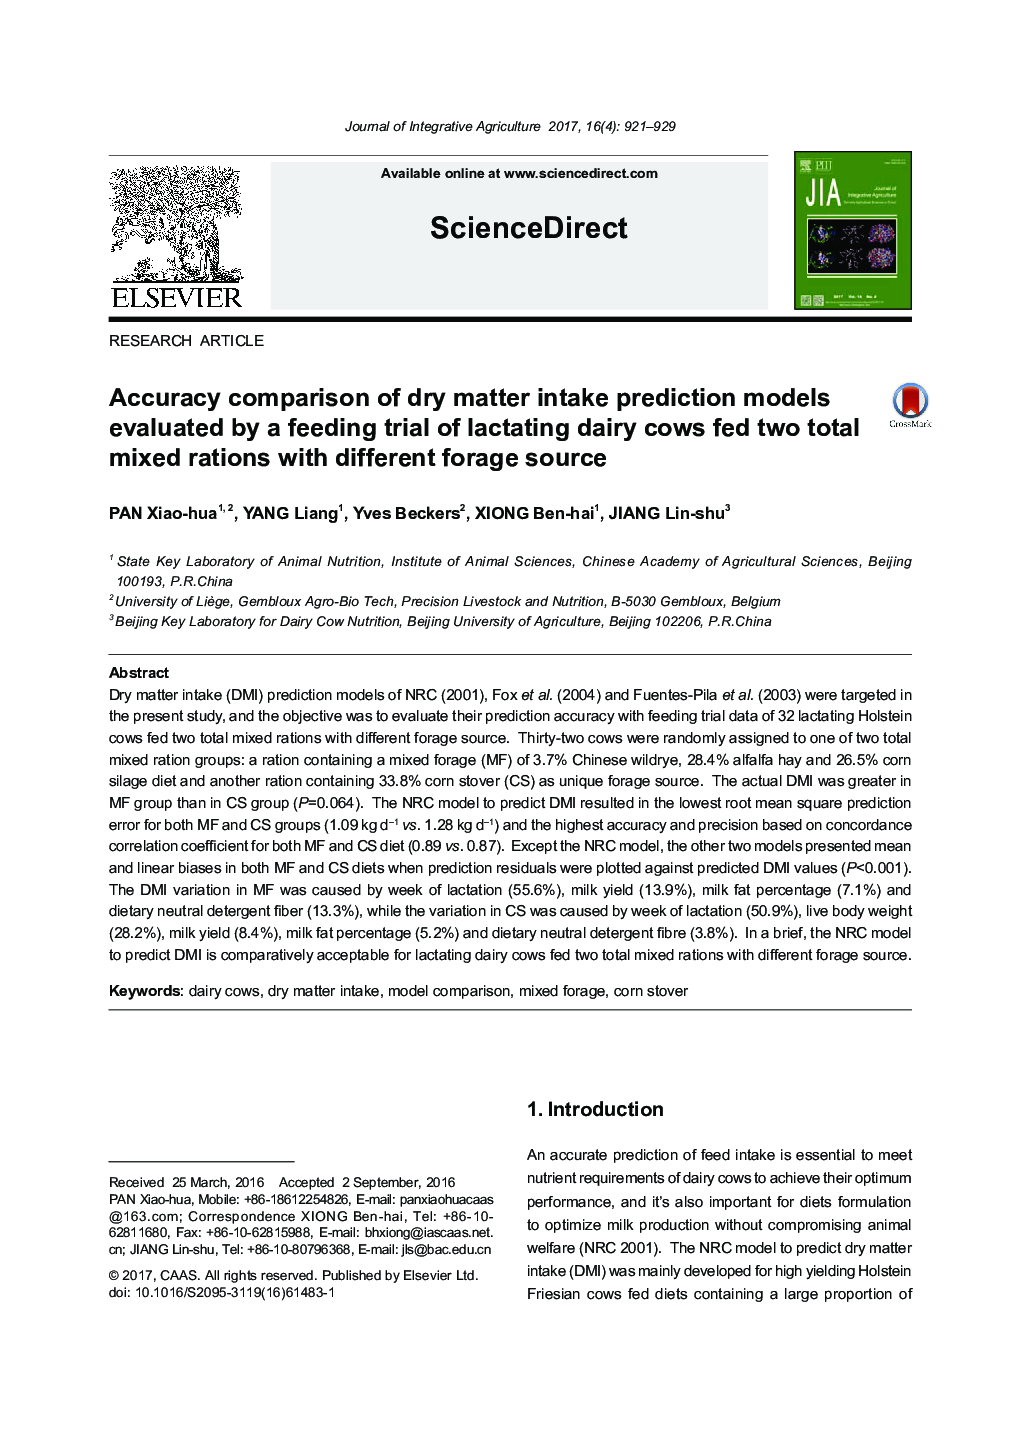 Accuracy comparison of dry matter intake prediction models evaluated by a feeding trial of lactating dairy cows fed two total mixed rations with different forage source